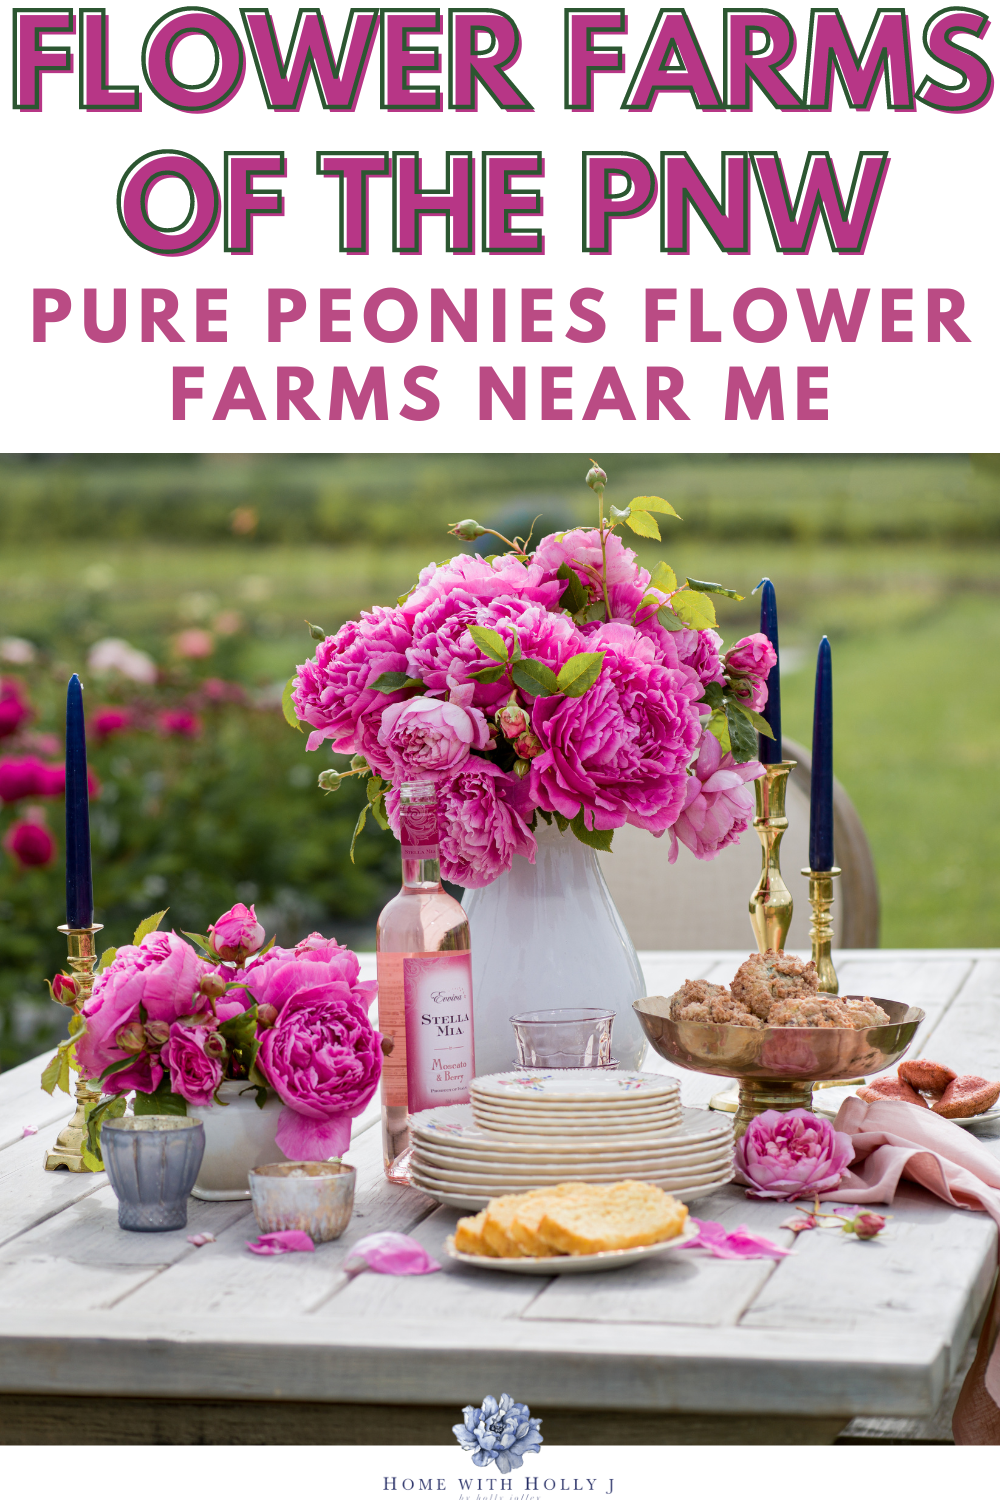 Explore Pure Peonies Flower Farms near me in the PNW! Immerse yourself in a blooming paradise and discover vibrant peonies. Read more here.